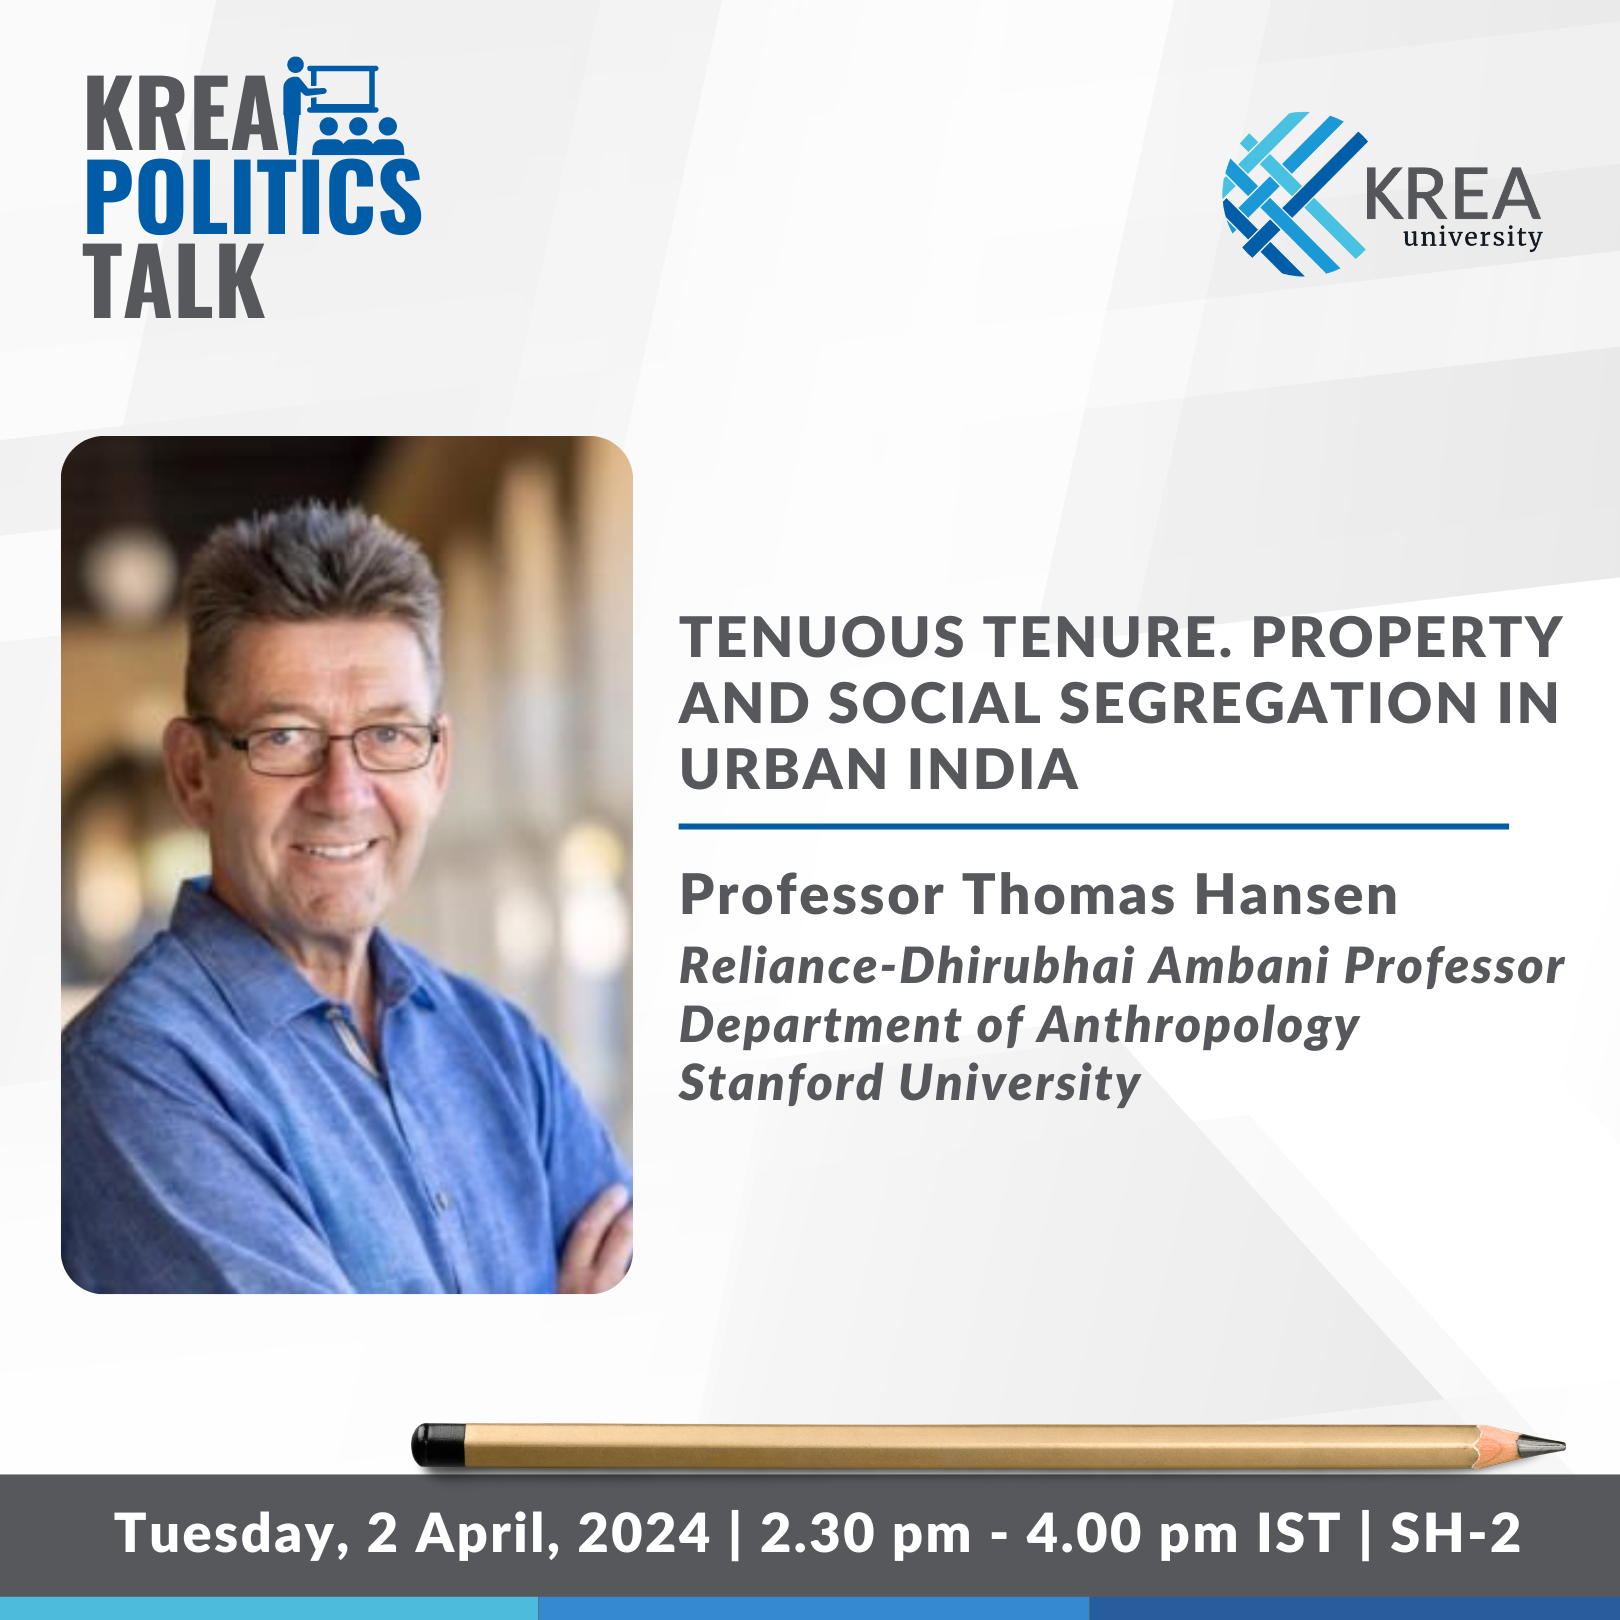 A Talk on Tenuous tenure. Property and social segregation in urban India